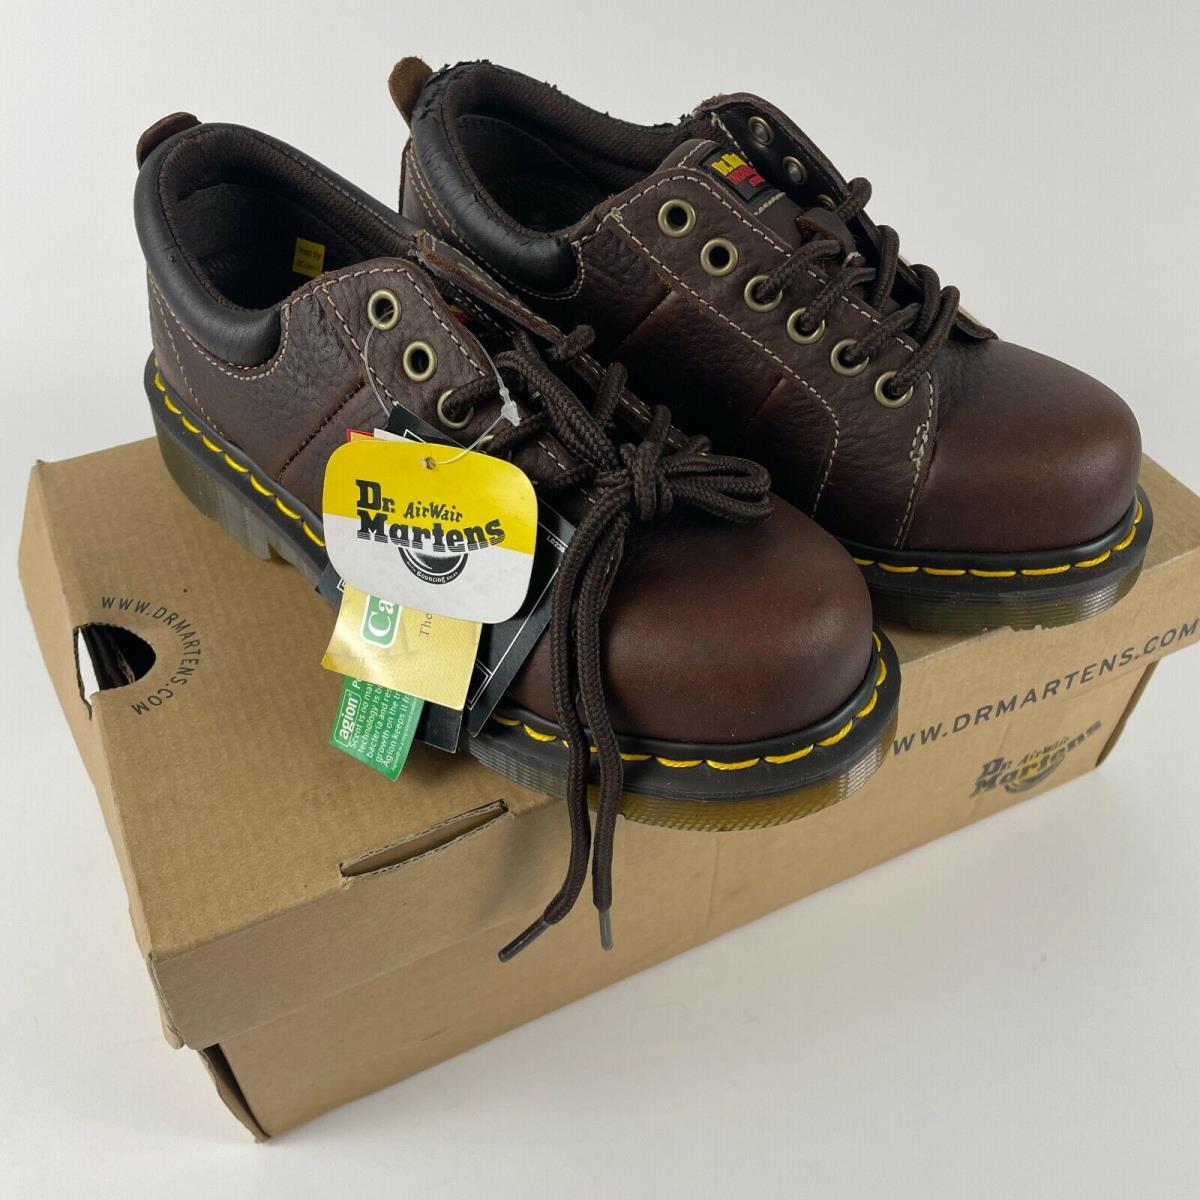 Dr Martens Mila ST Steel Toe Safety Brown Shoes Womens Size US 5 Uk 3 Boots